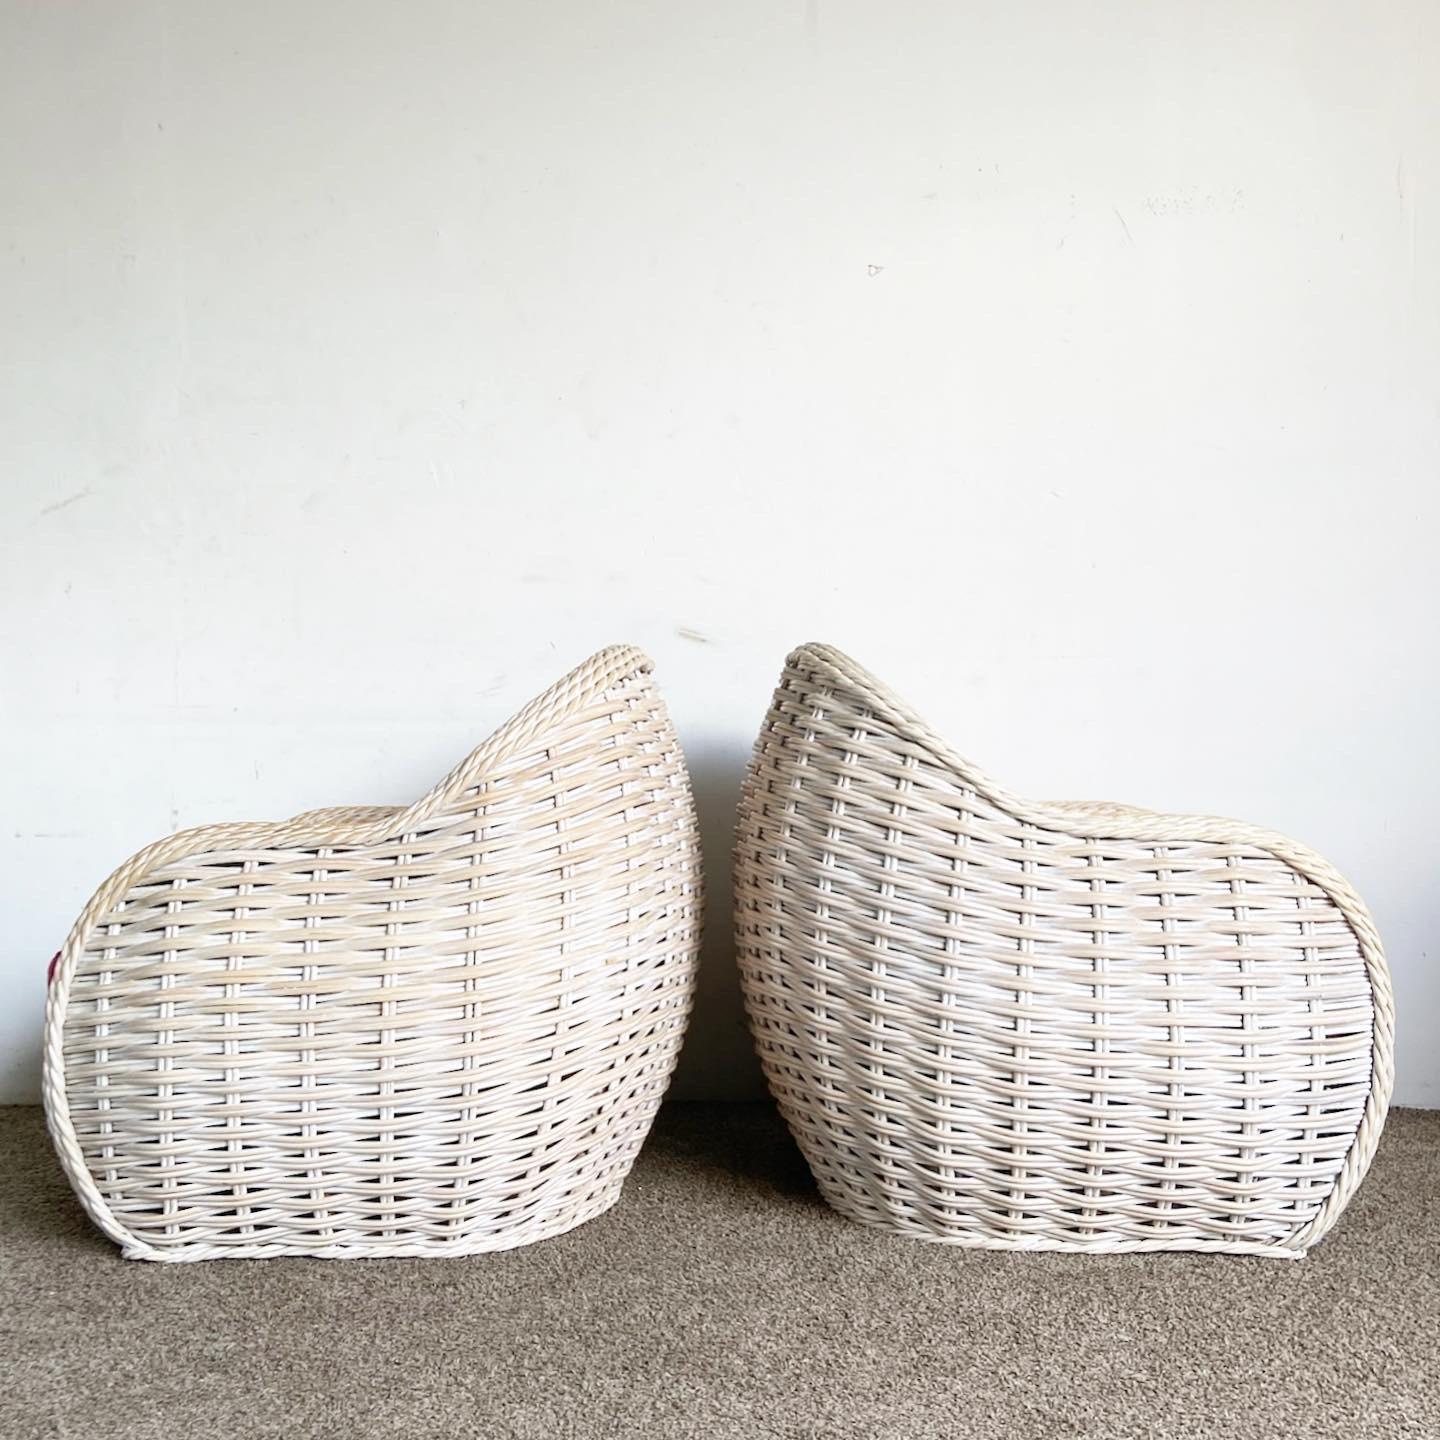 Boho Chic Woven Wicker Bulbous Lounge Chairs - a Pair In Good Condition For Sale In Delray Beach, FL